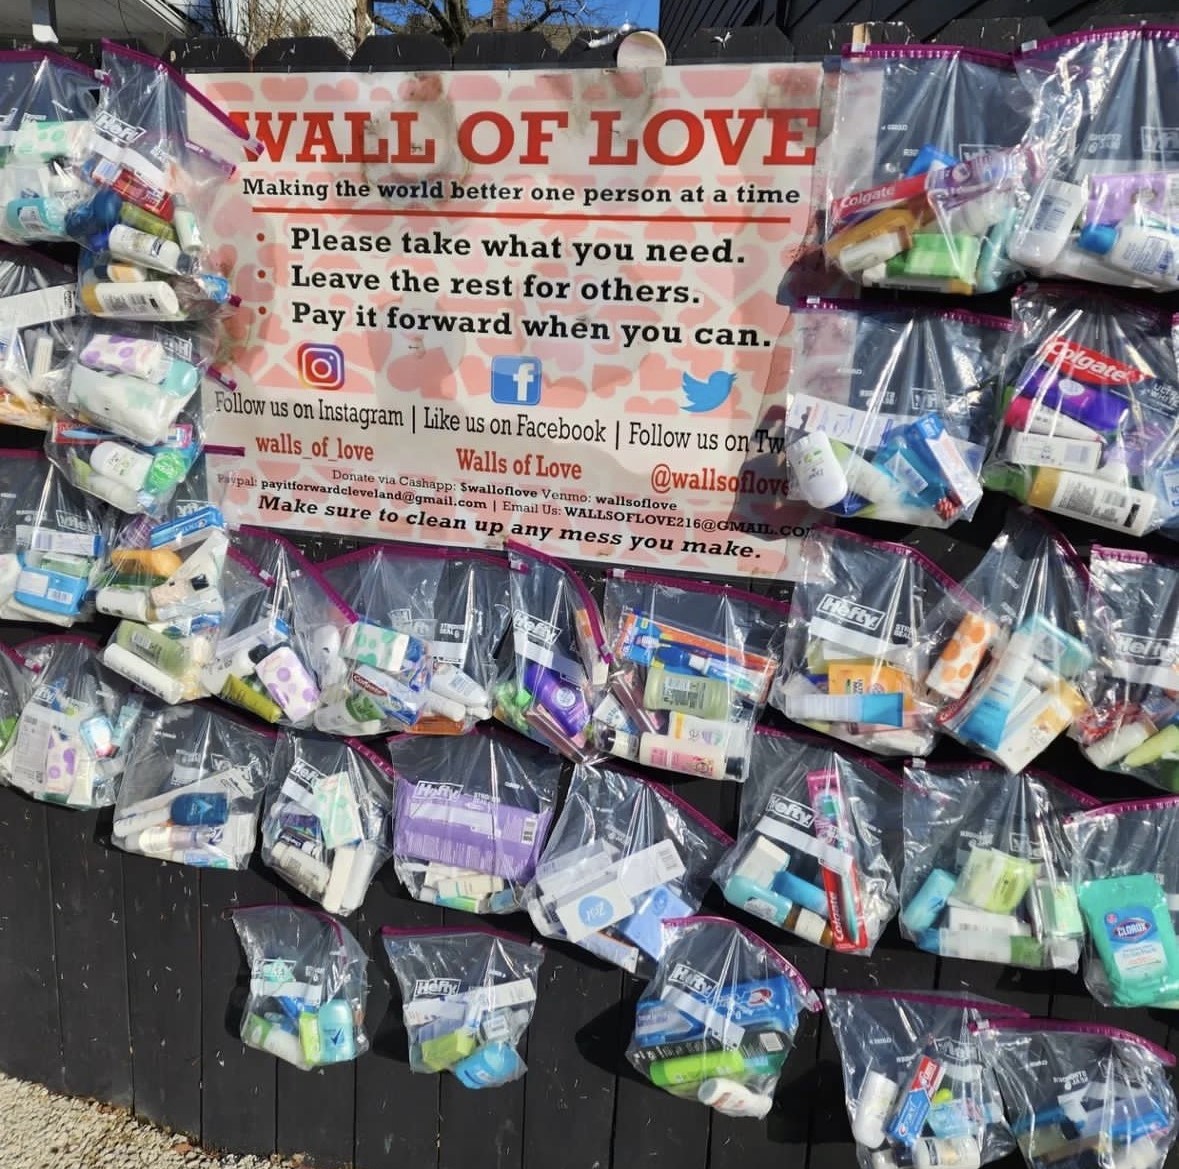 Wall of love with supplies on fence.